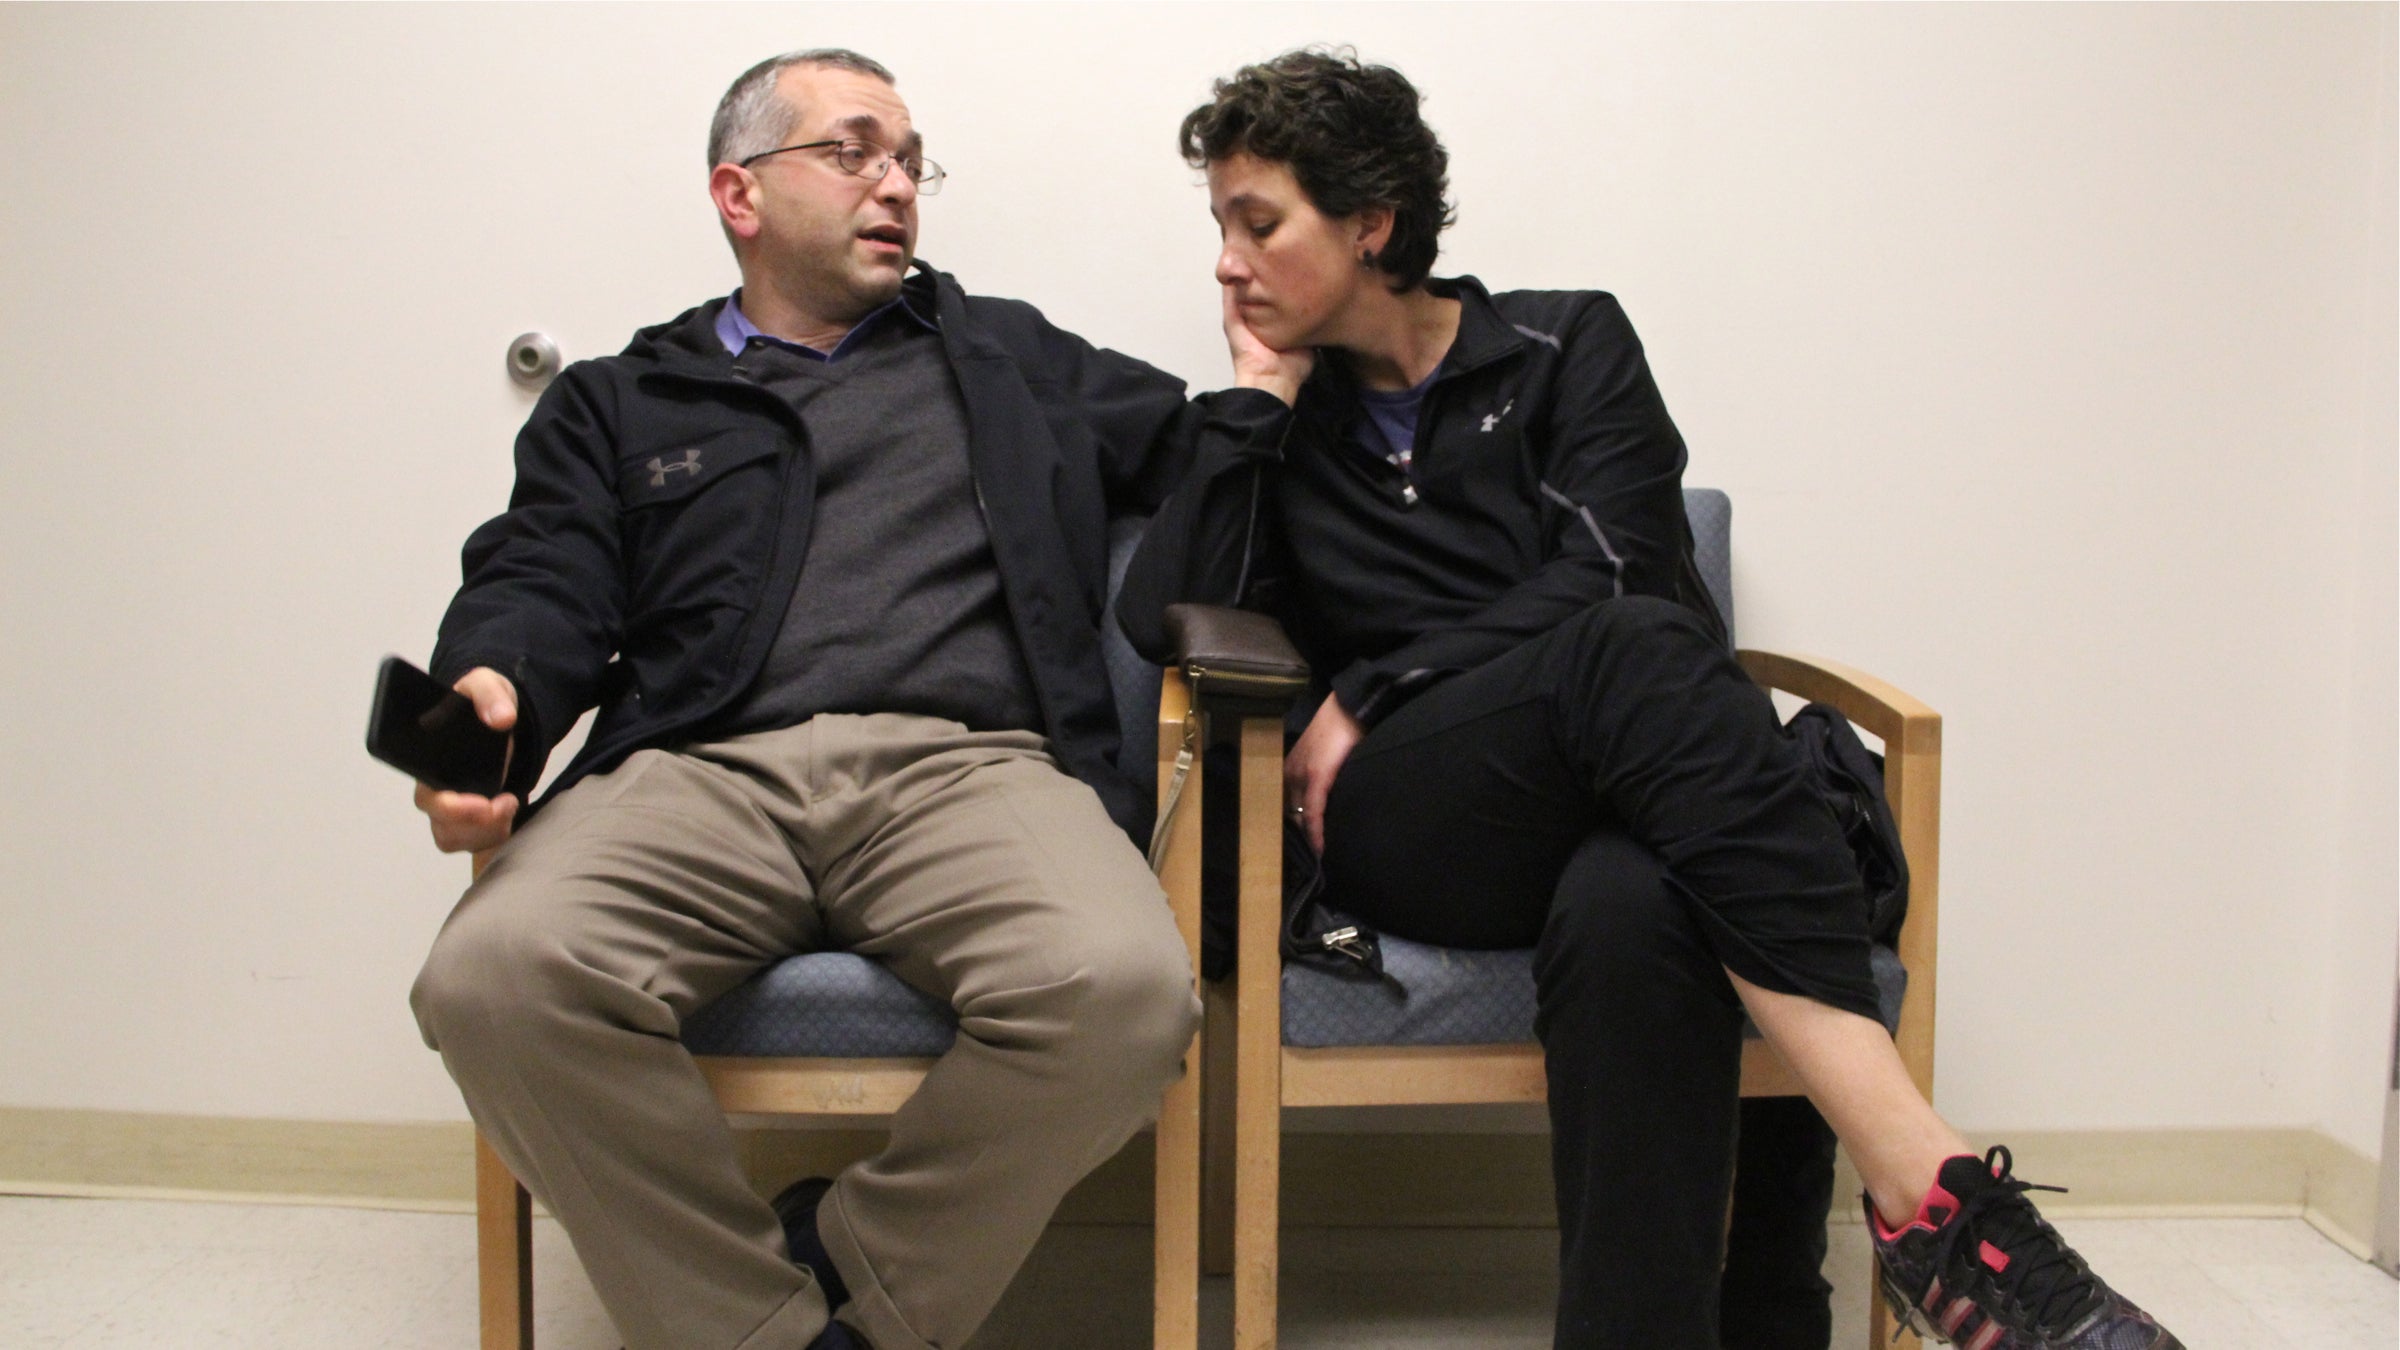 Dr. Hooman Noorchashm, a cardiac surgeon, waits with his wife, Dr. Amy Reed, an anaesthesiologist, wait in her doctor's office at Pennsylvania Hospital. (Emma Lee/WHYY)